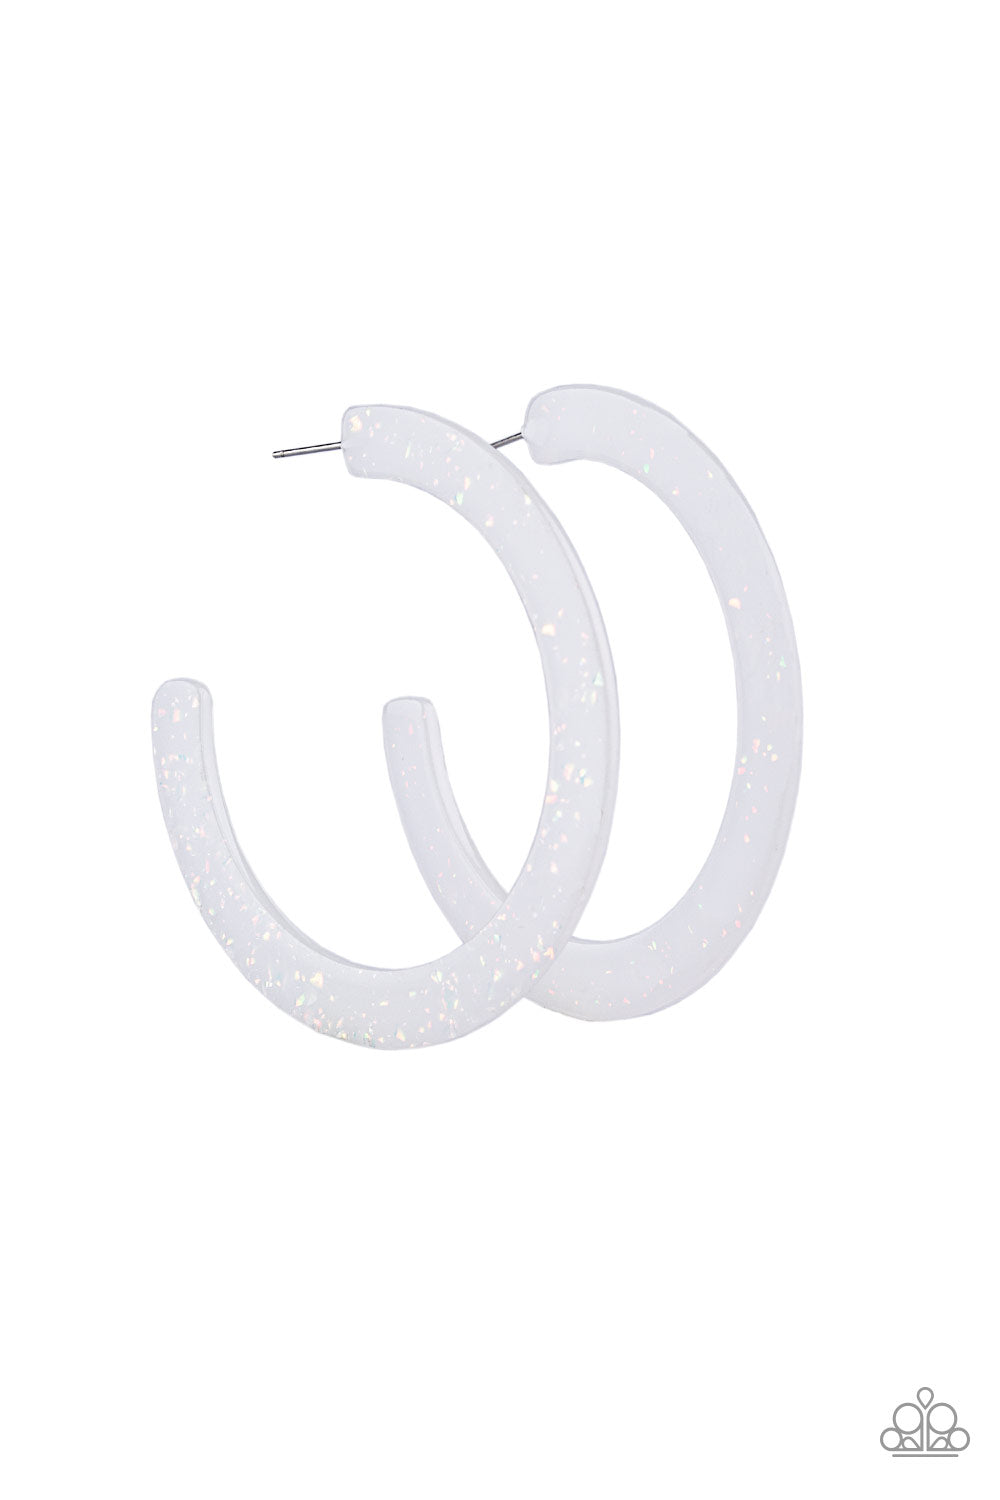 Paparazzi Accessories Haute Tamale - White Hoop Earrings - Lady T Accessories